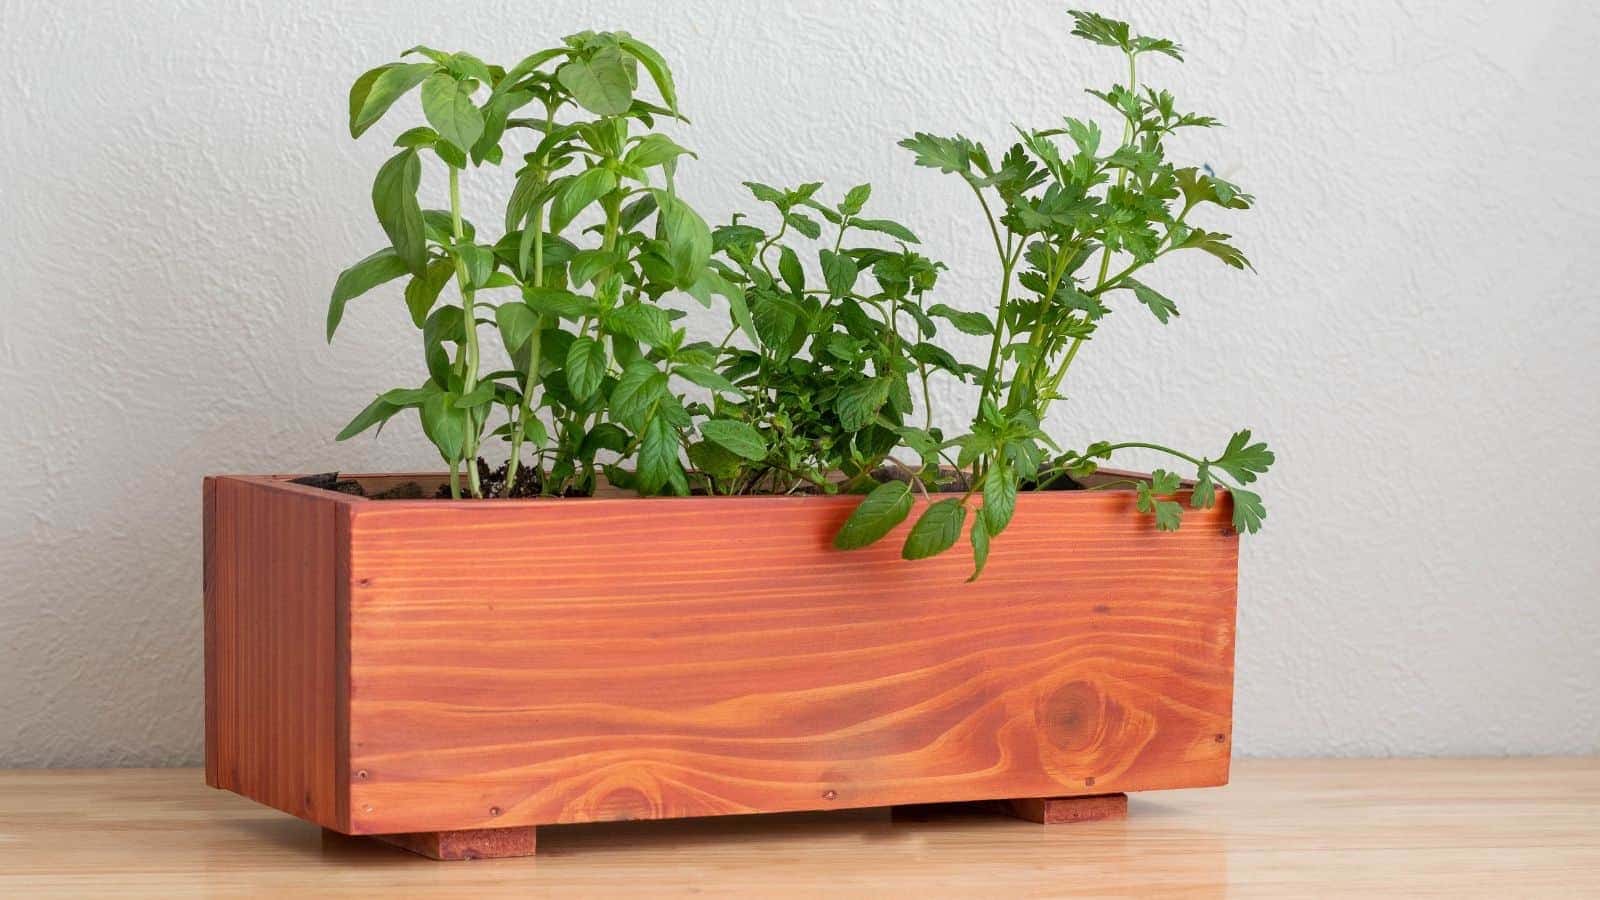 <p>Build this simple DIY planter and use it indoors or out. The simple design is perfect for herbs, flowers, or plants. </p>